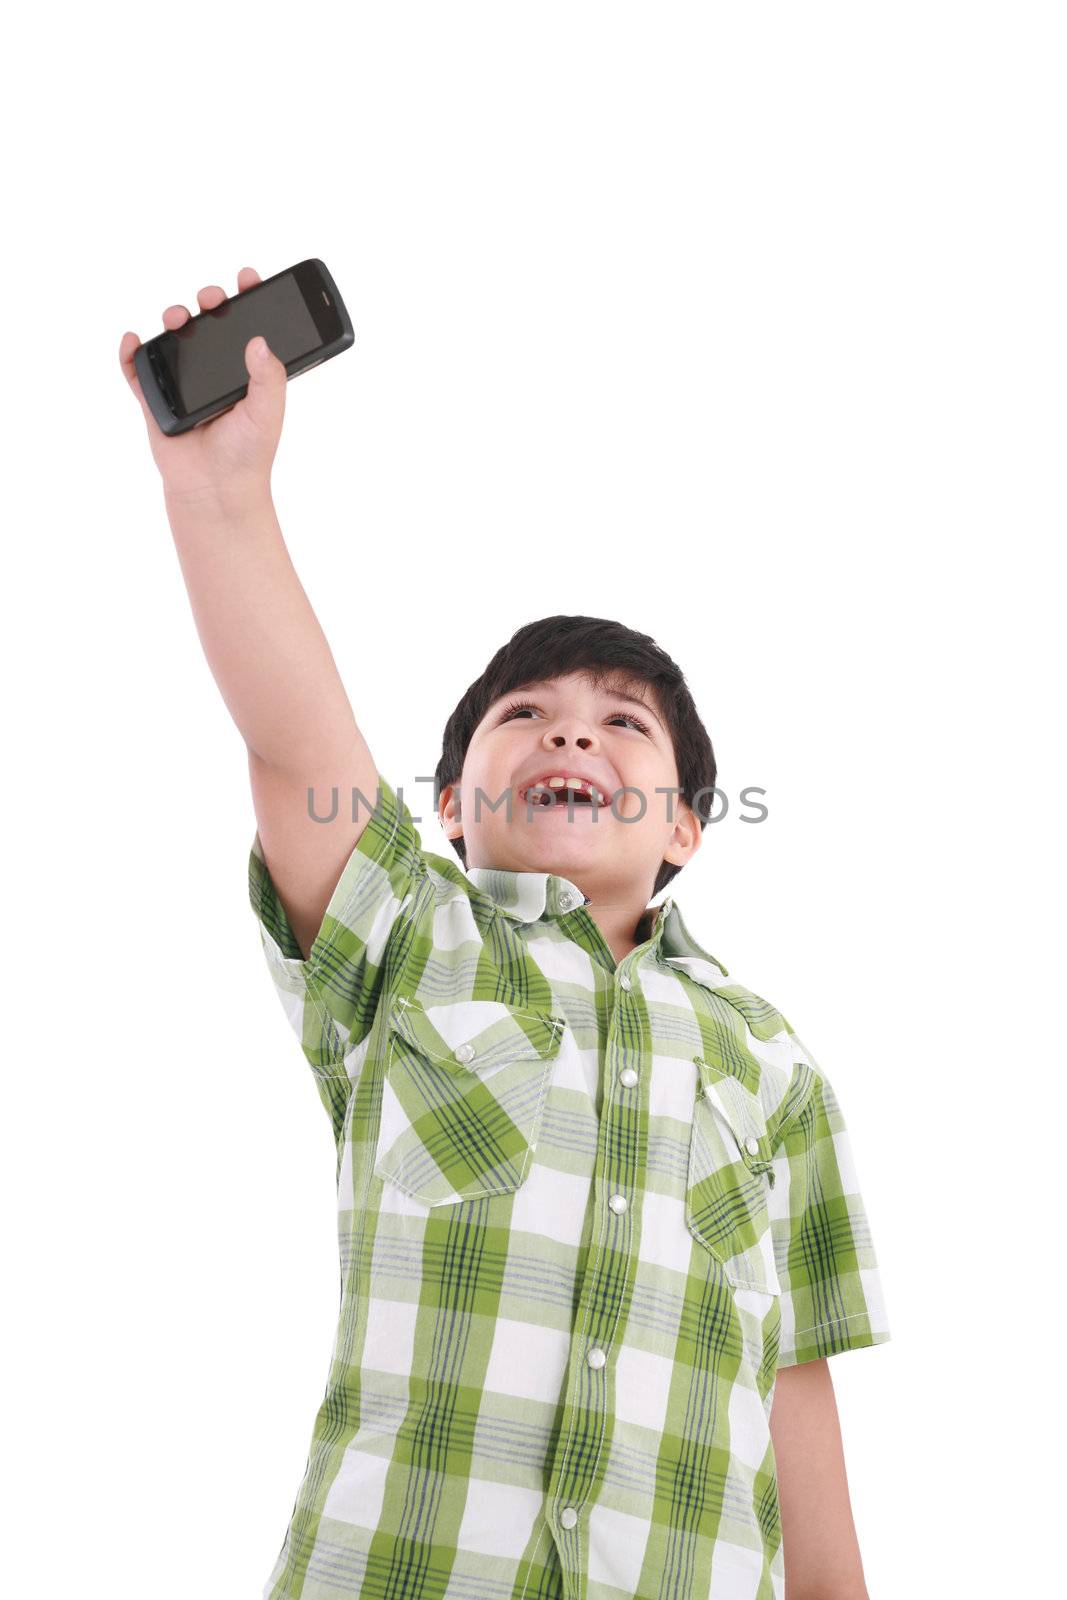 boy holding up cellular phone and smiling by dacasdo